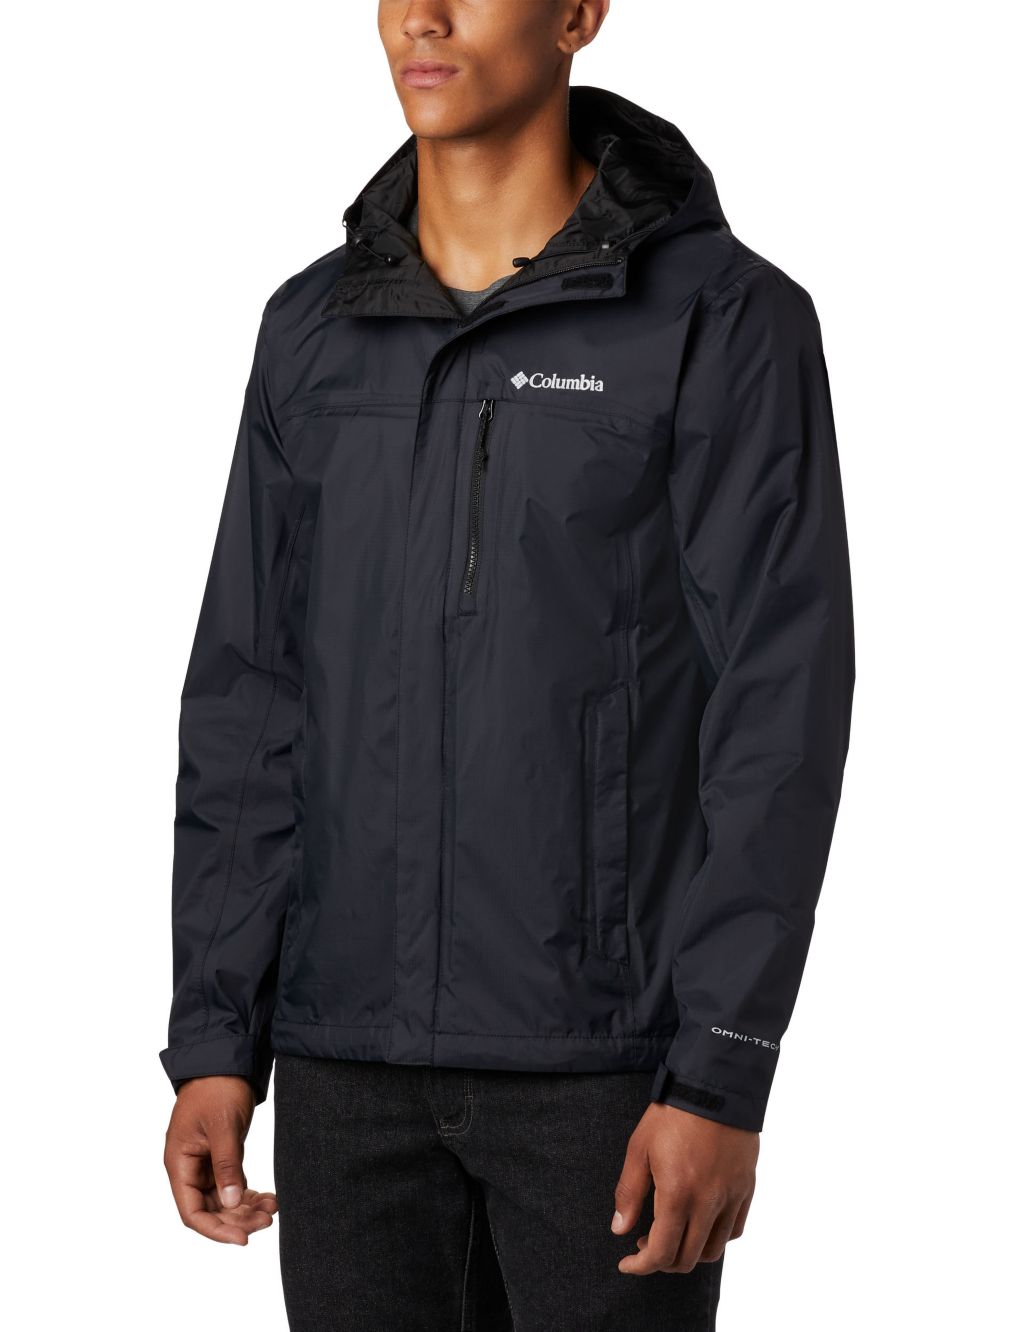  Columbia Sportswear Men's Go To Jacket, Black, Small :  Clothing, Shoes & Jewelry